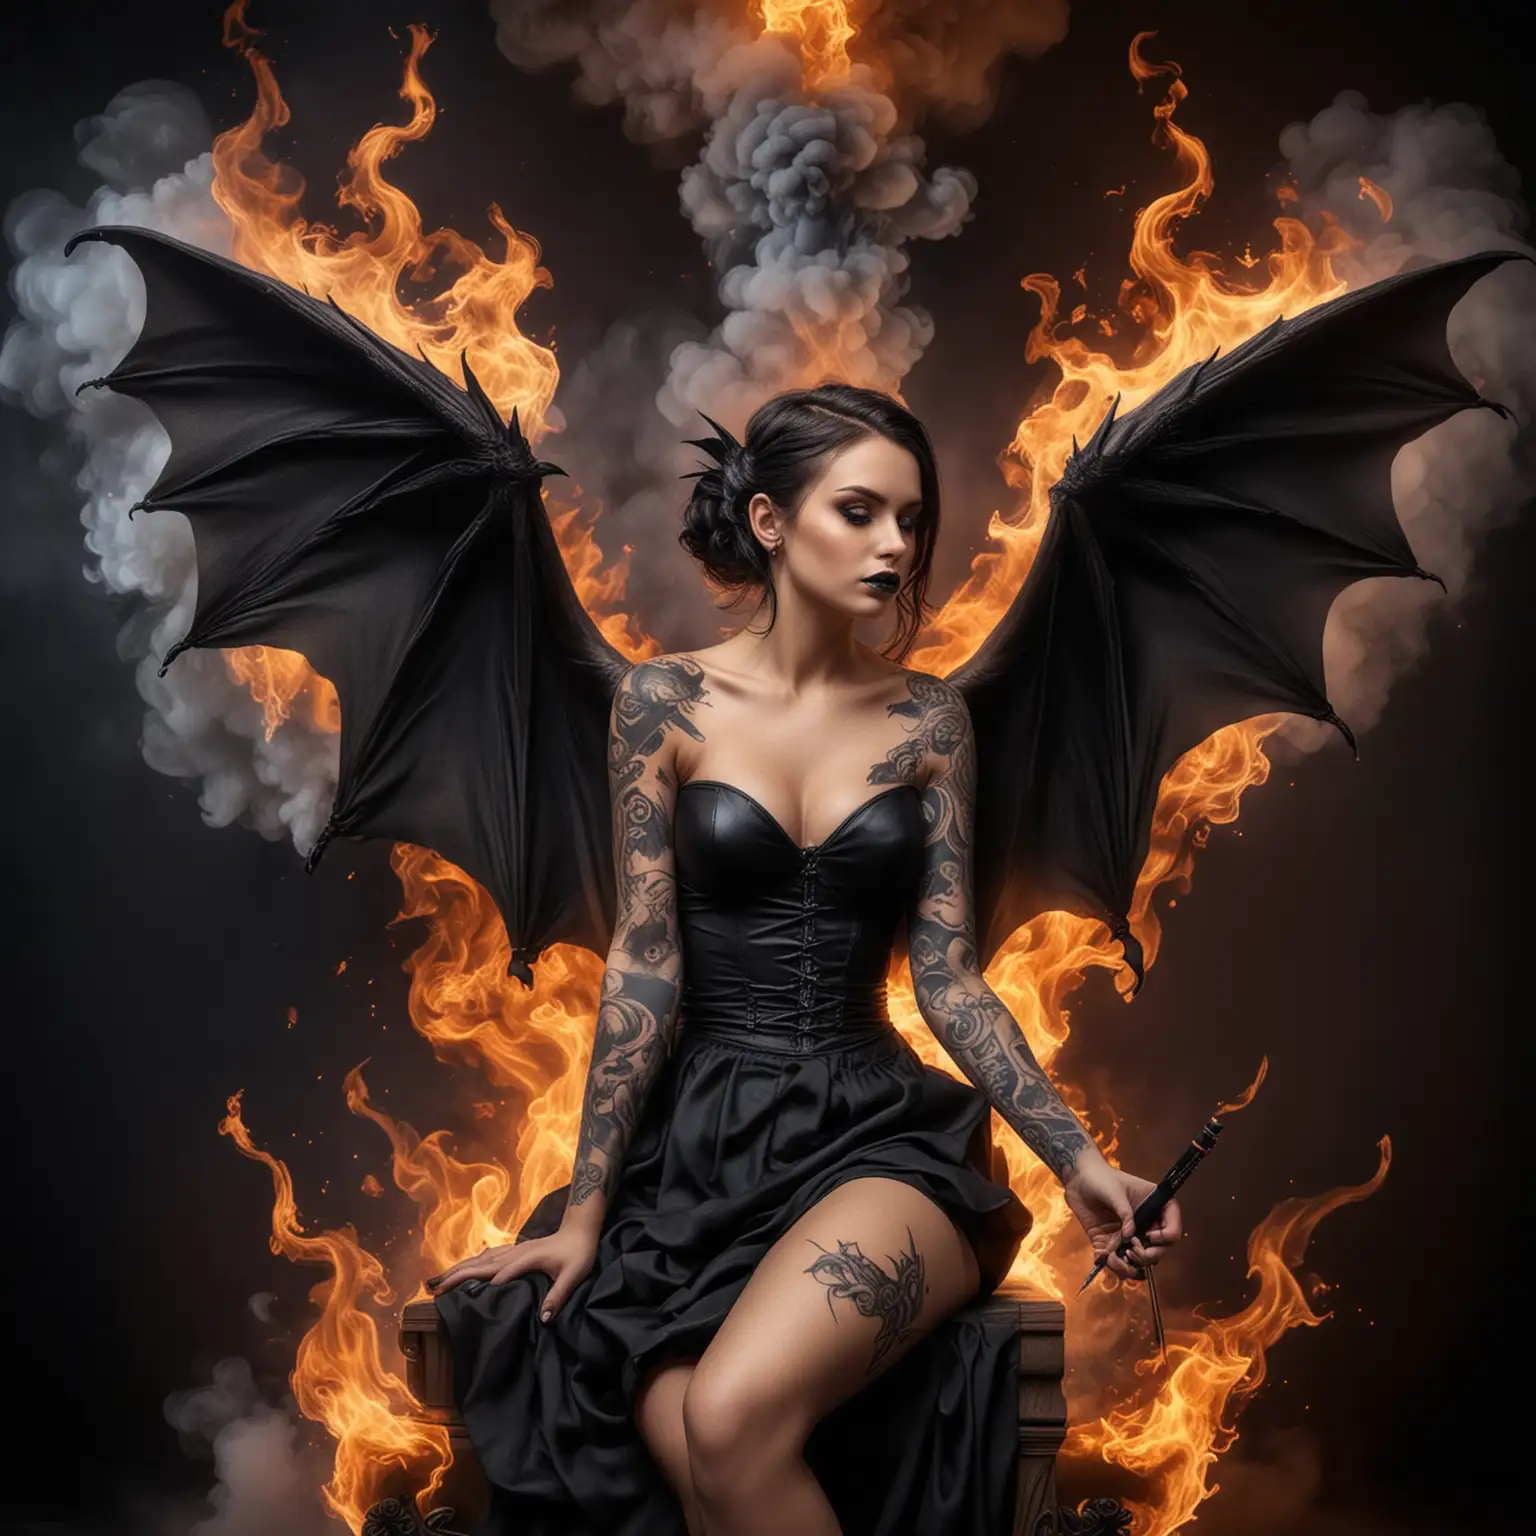 hyper realistic photography
a beautiful tattooed angel, She is a tattoo artist and wearing a black  dress while she has black bat wings, seated on cloud of smoke and flames While hold tattoo pen in her hand and present her latest works
good rendering 